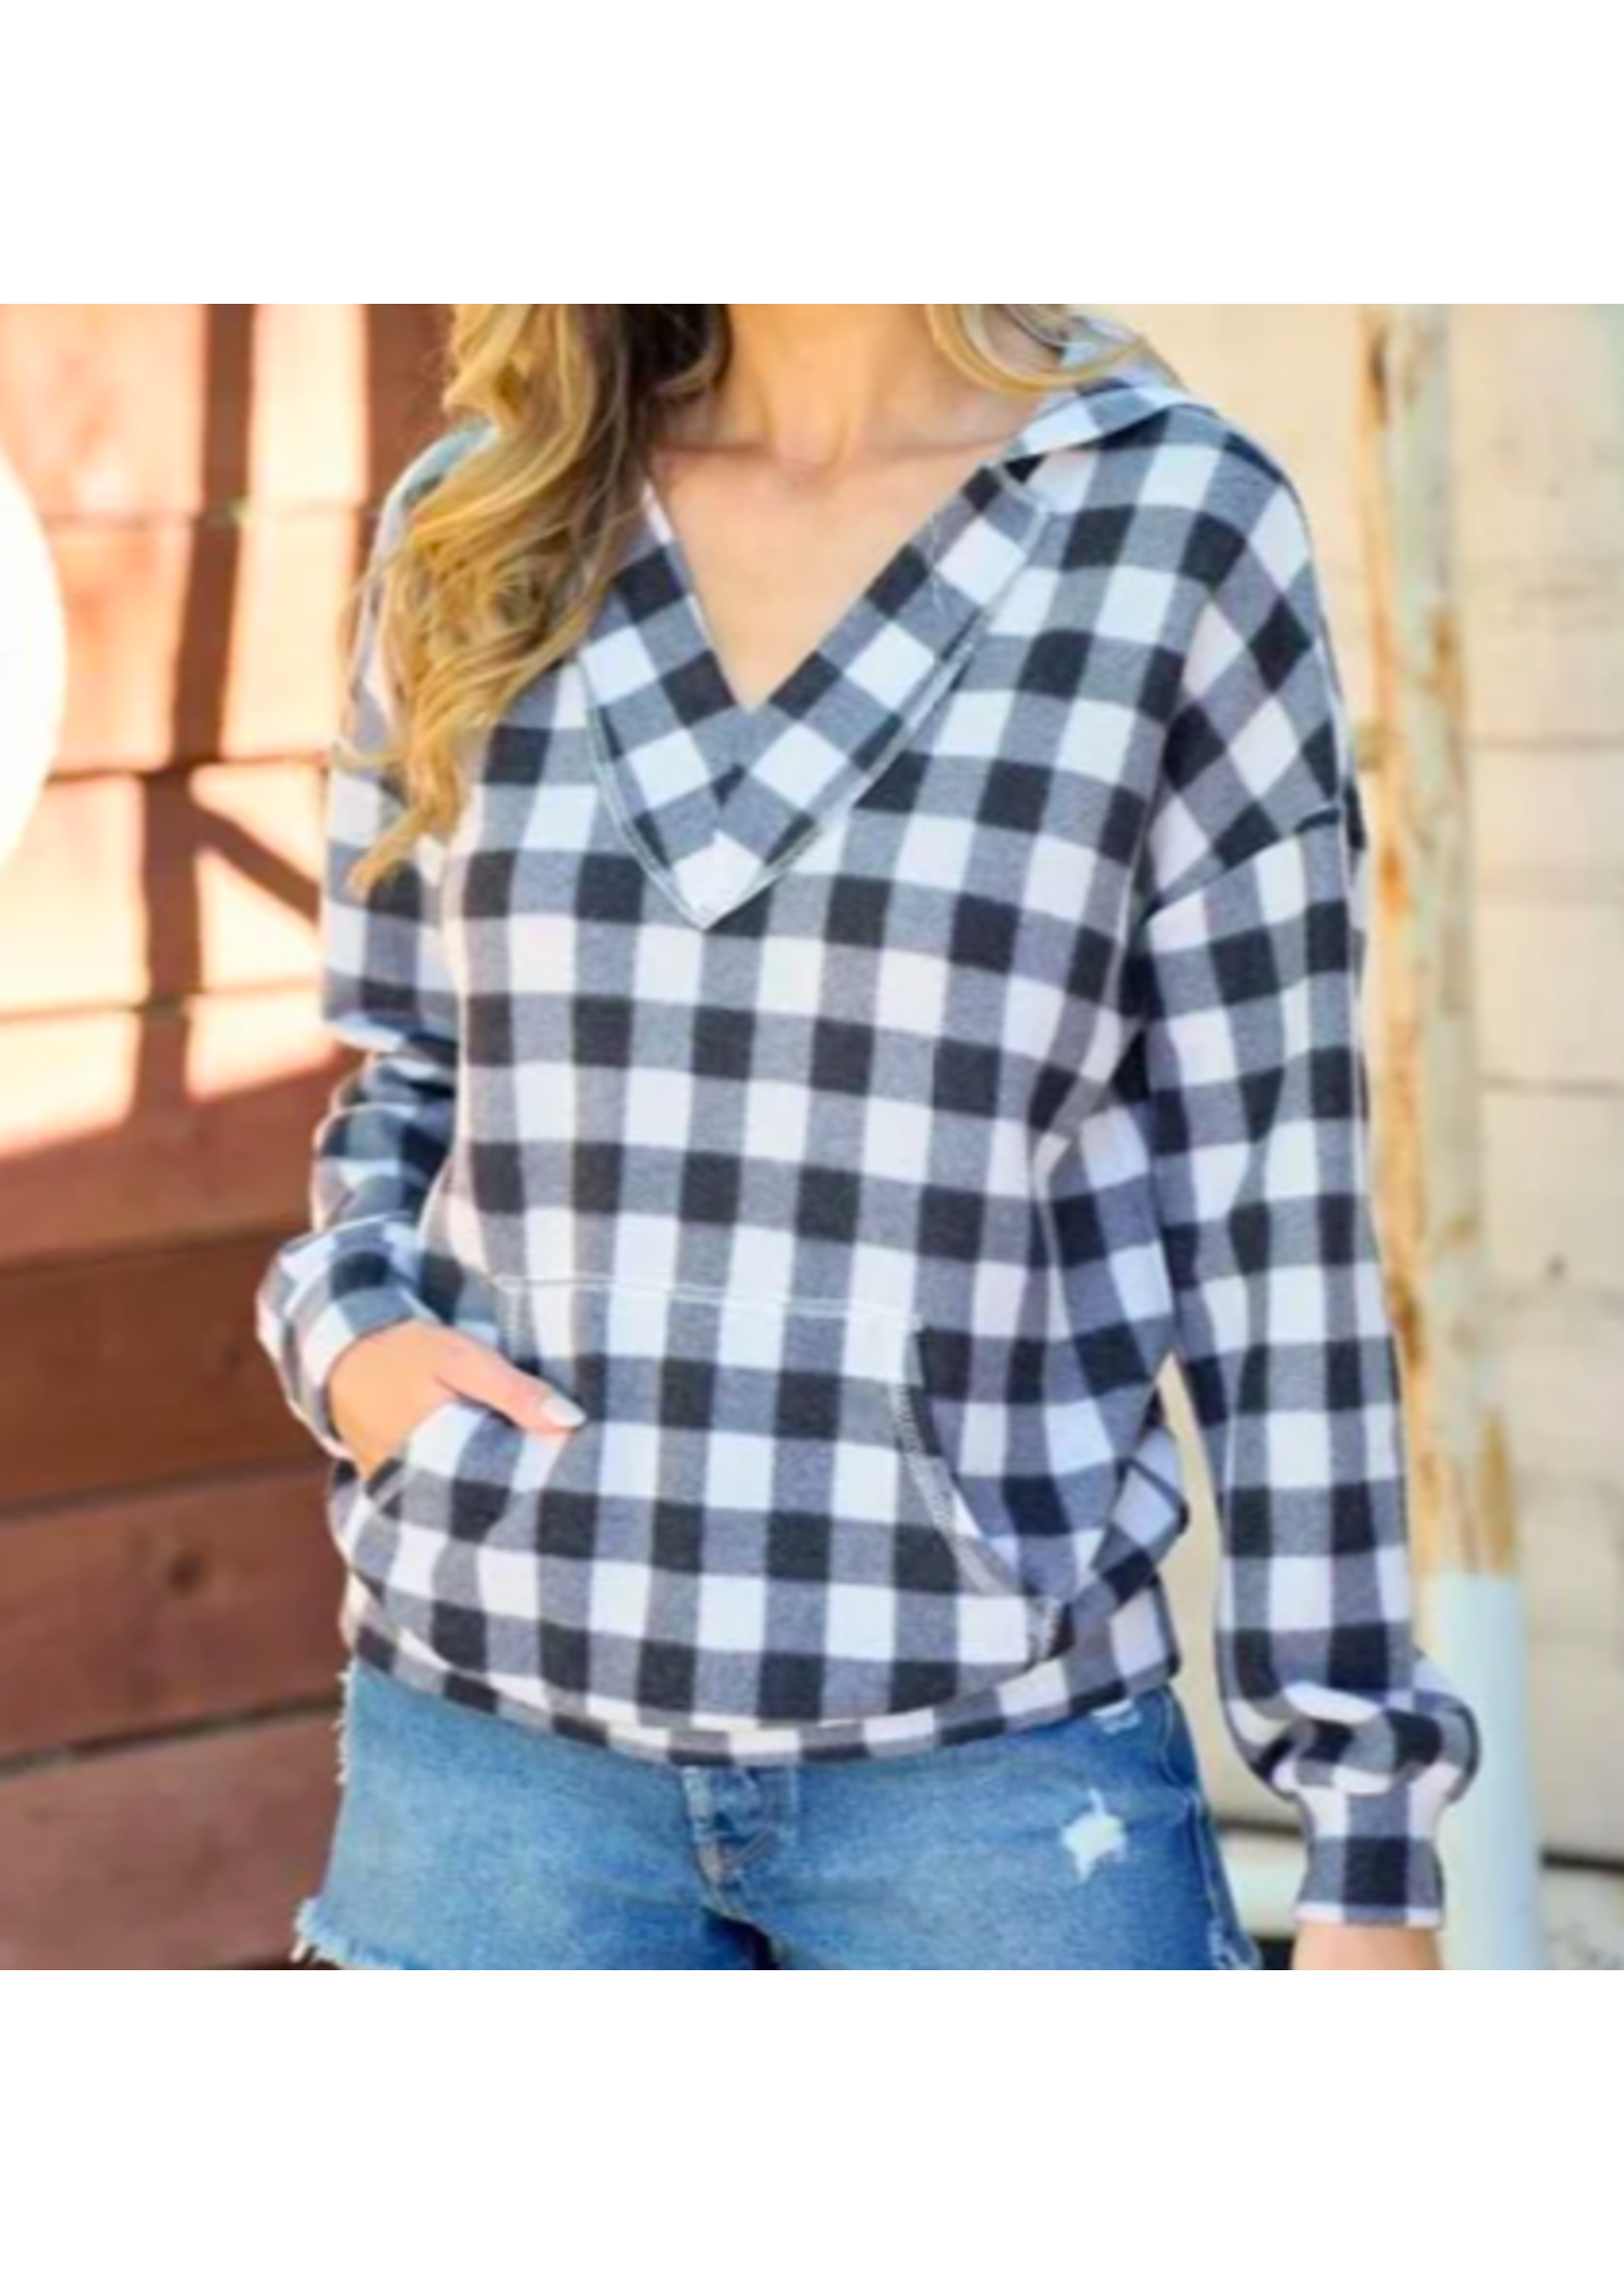 Hailey & Co. Thats All Right Plaid